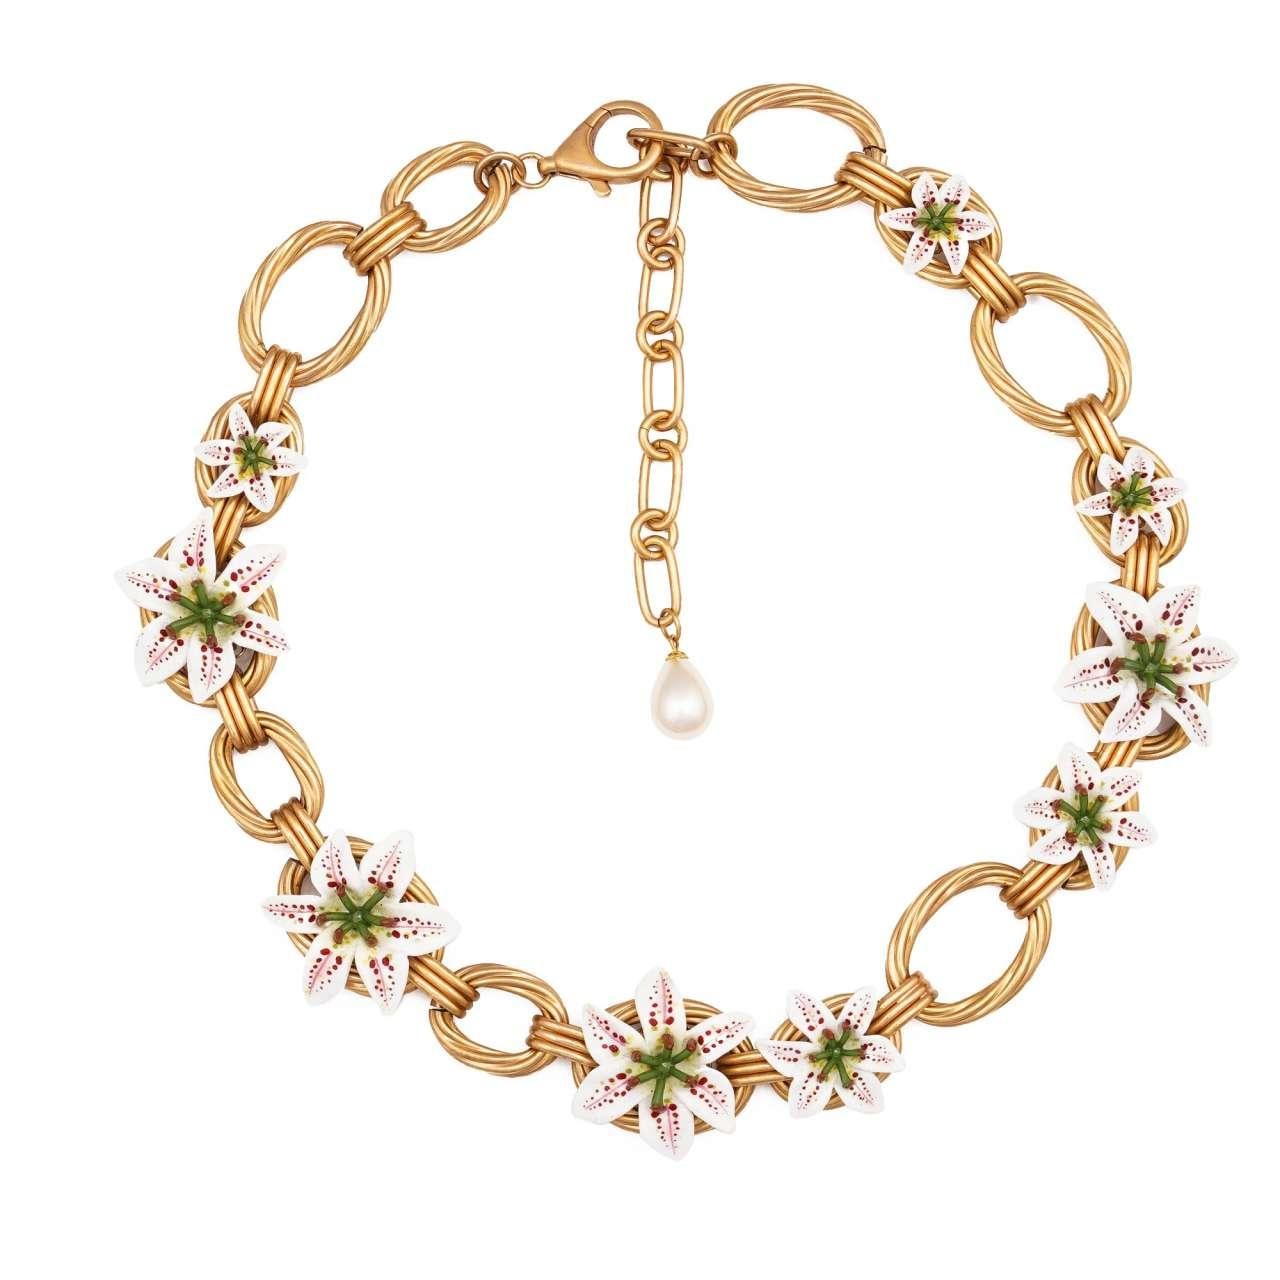 - Necklace / belt with hand painted lilies and pearl in white and gold by DOLCE & GABBANA - RUNWAY - Dolce & Gabbana Fashion Show - New with Box - Made in Italy - Nickel free - Model: WLL6L1-W1111-Z0000 - Material:  70% Brass, 30% Resin - Color: